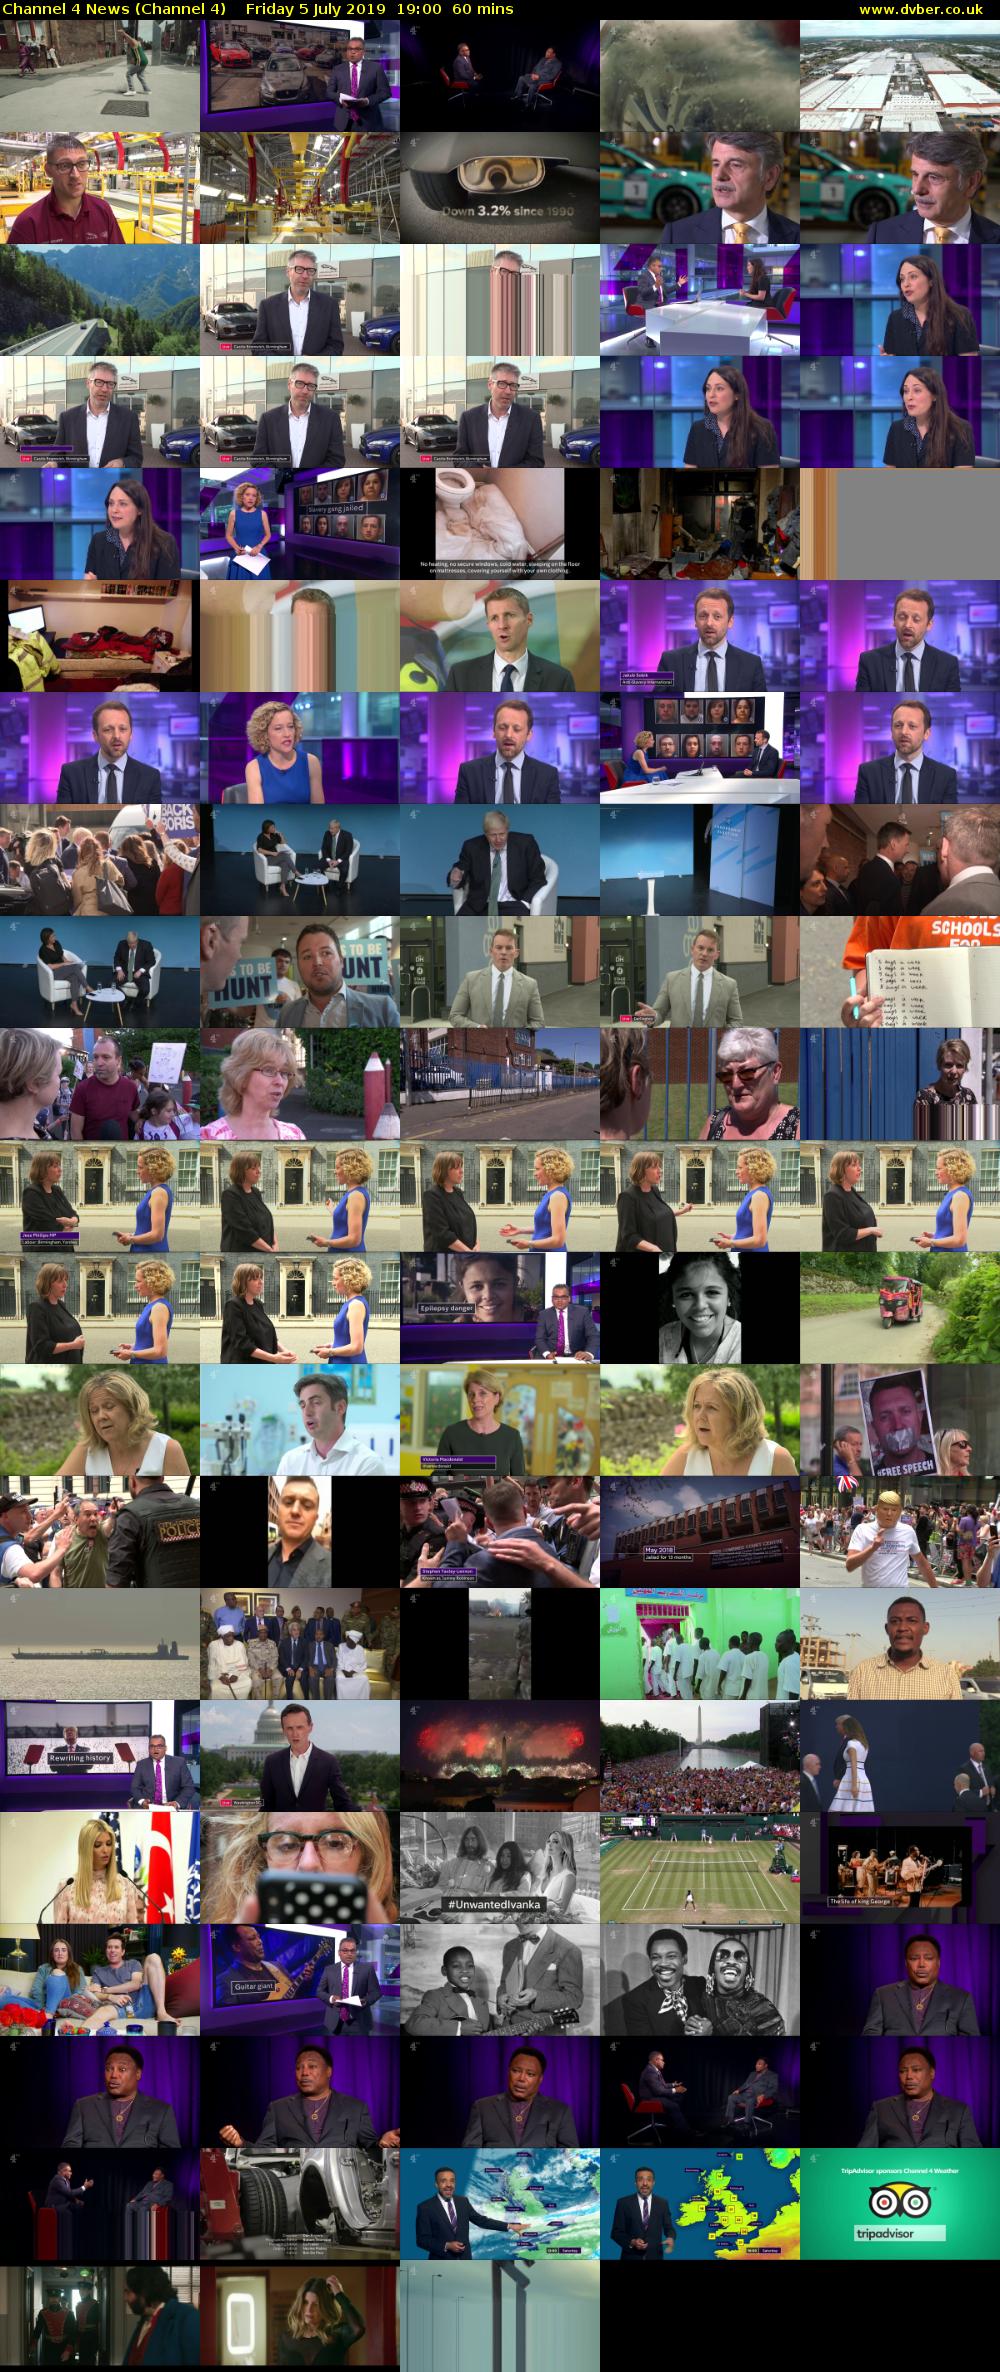 Channel 4 News (Channel 4) Friday 5 July 2019 19:00 - 20:00